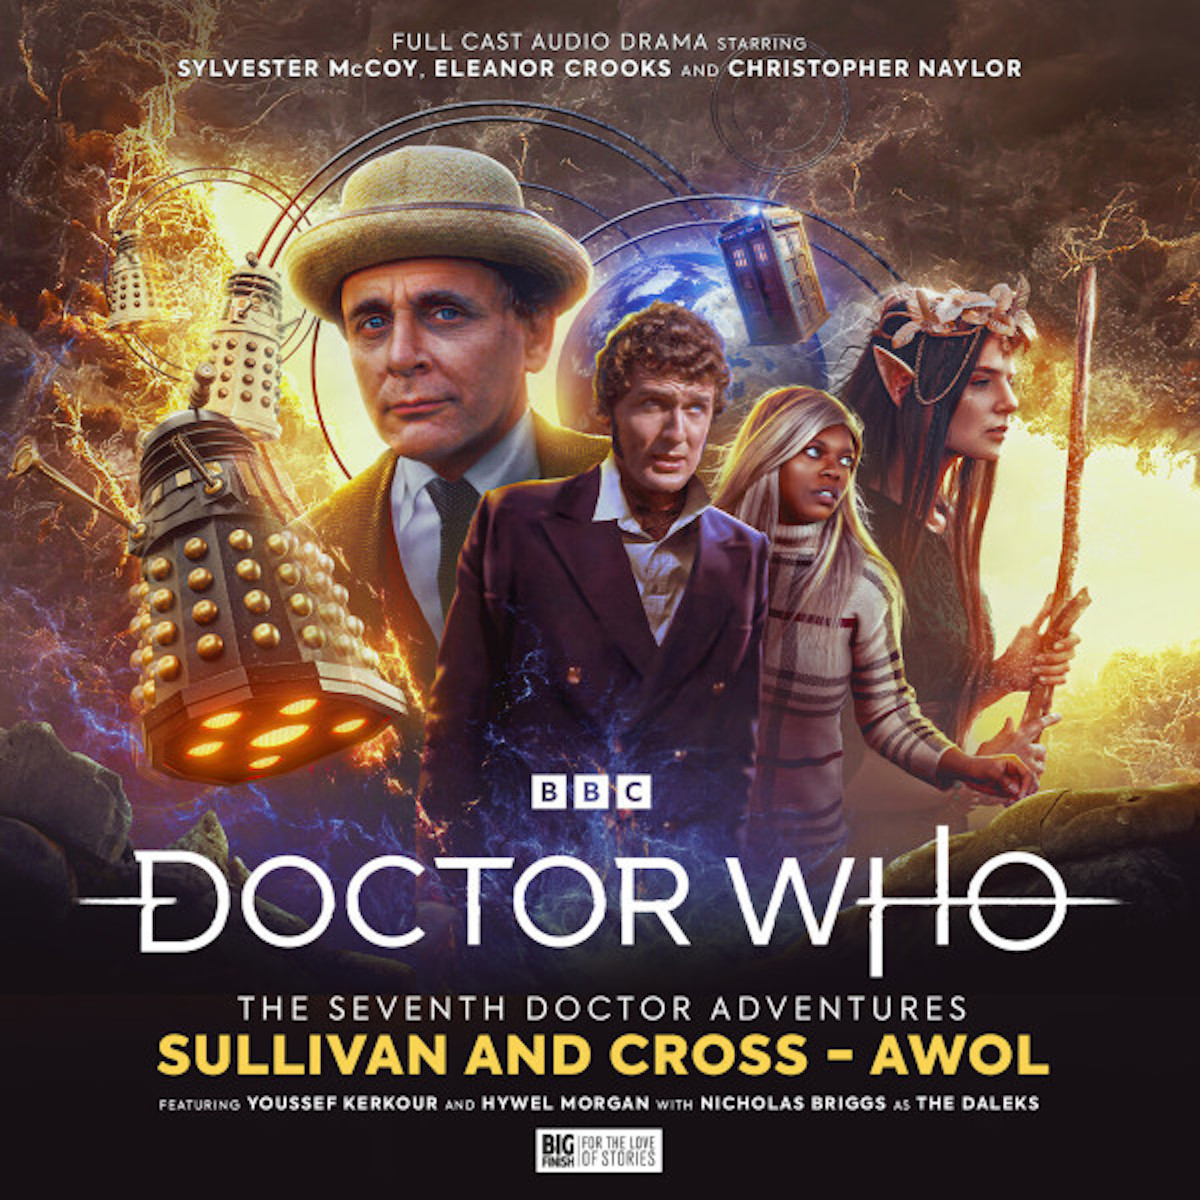 The Seventh Doctor Adventures: Sullivan and Cross - AWOL